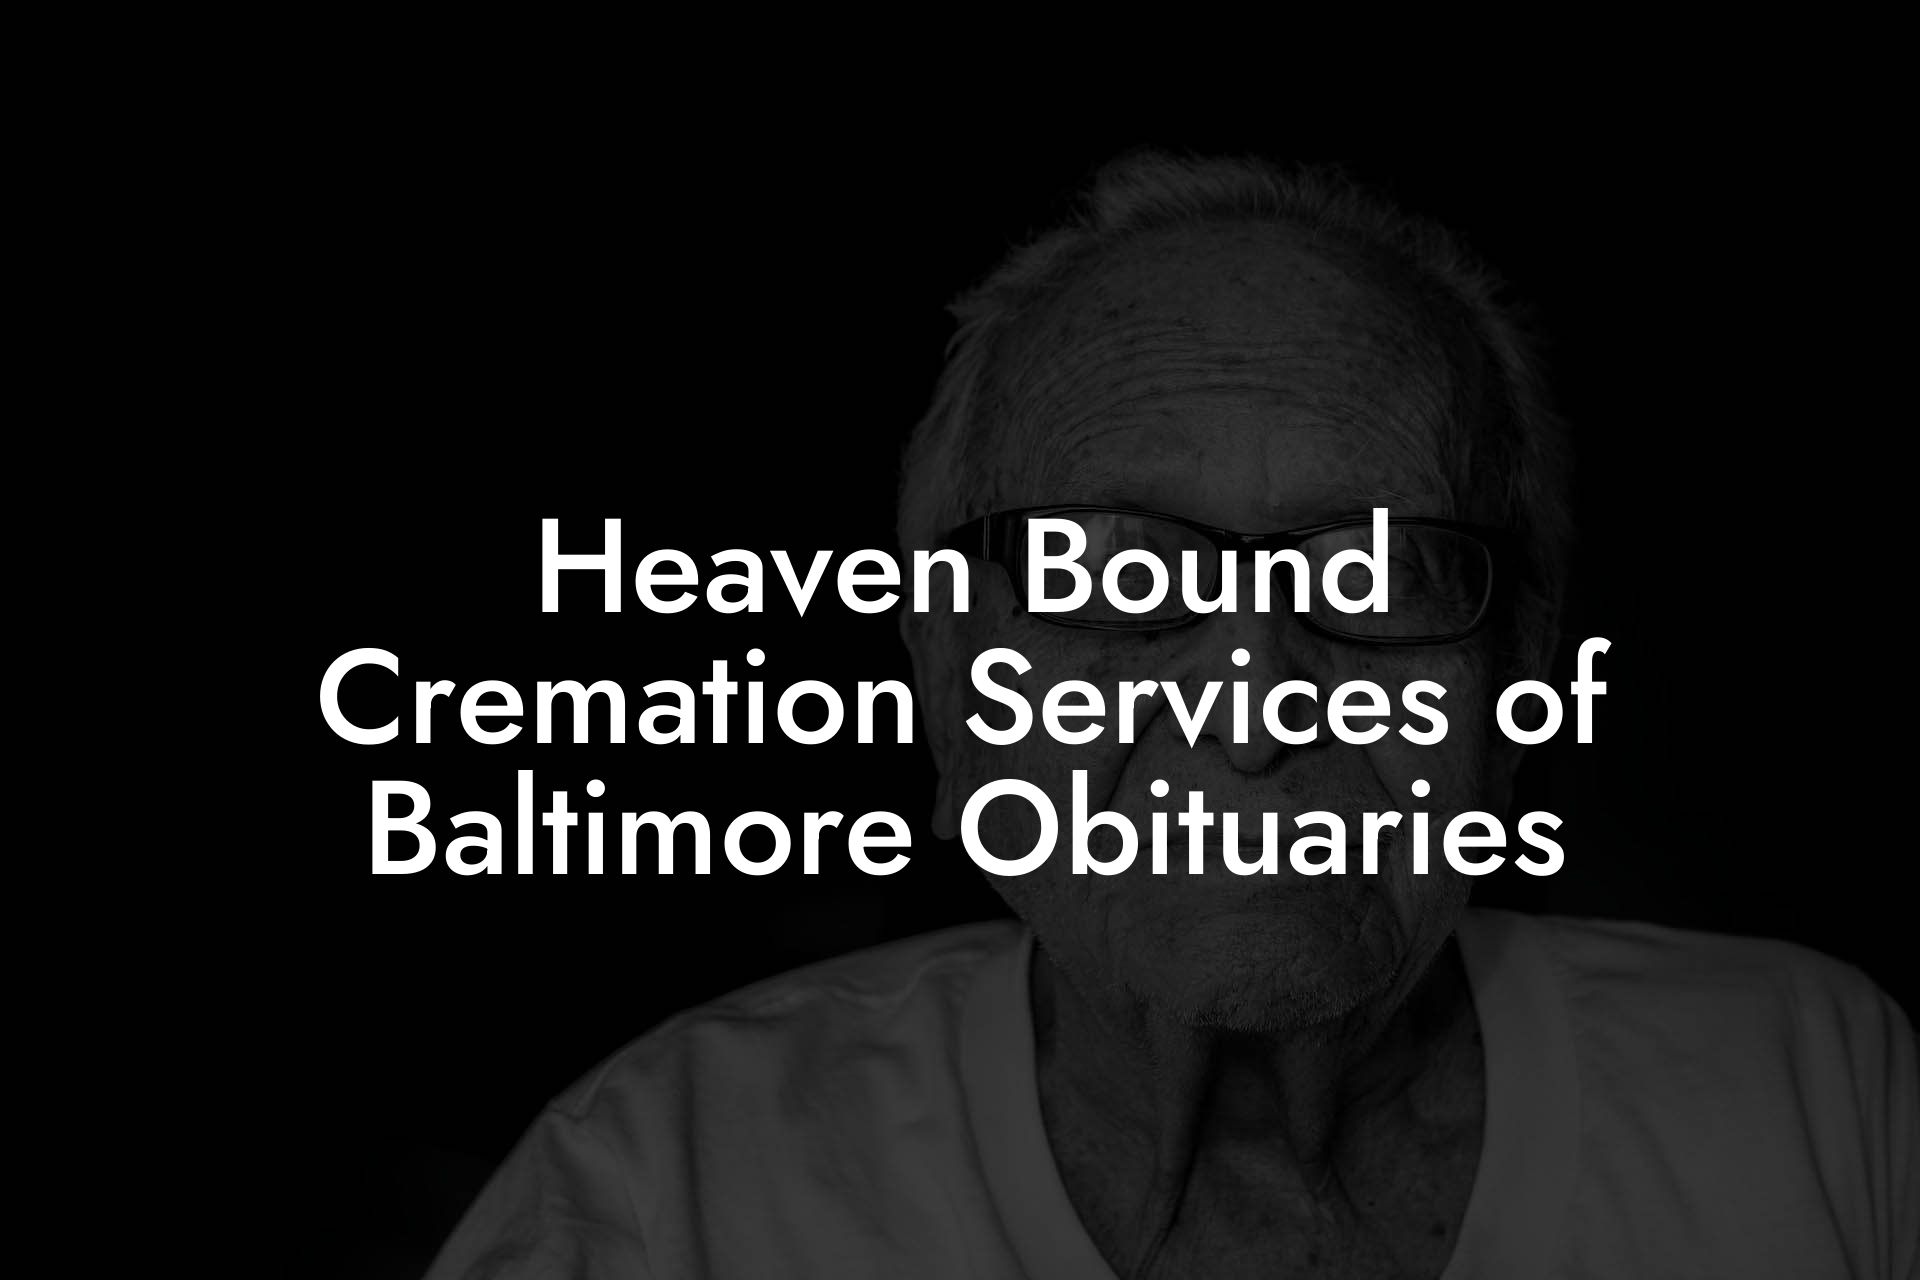 Heaven Bound Cremation Services of Baltimore Obituaries